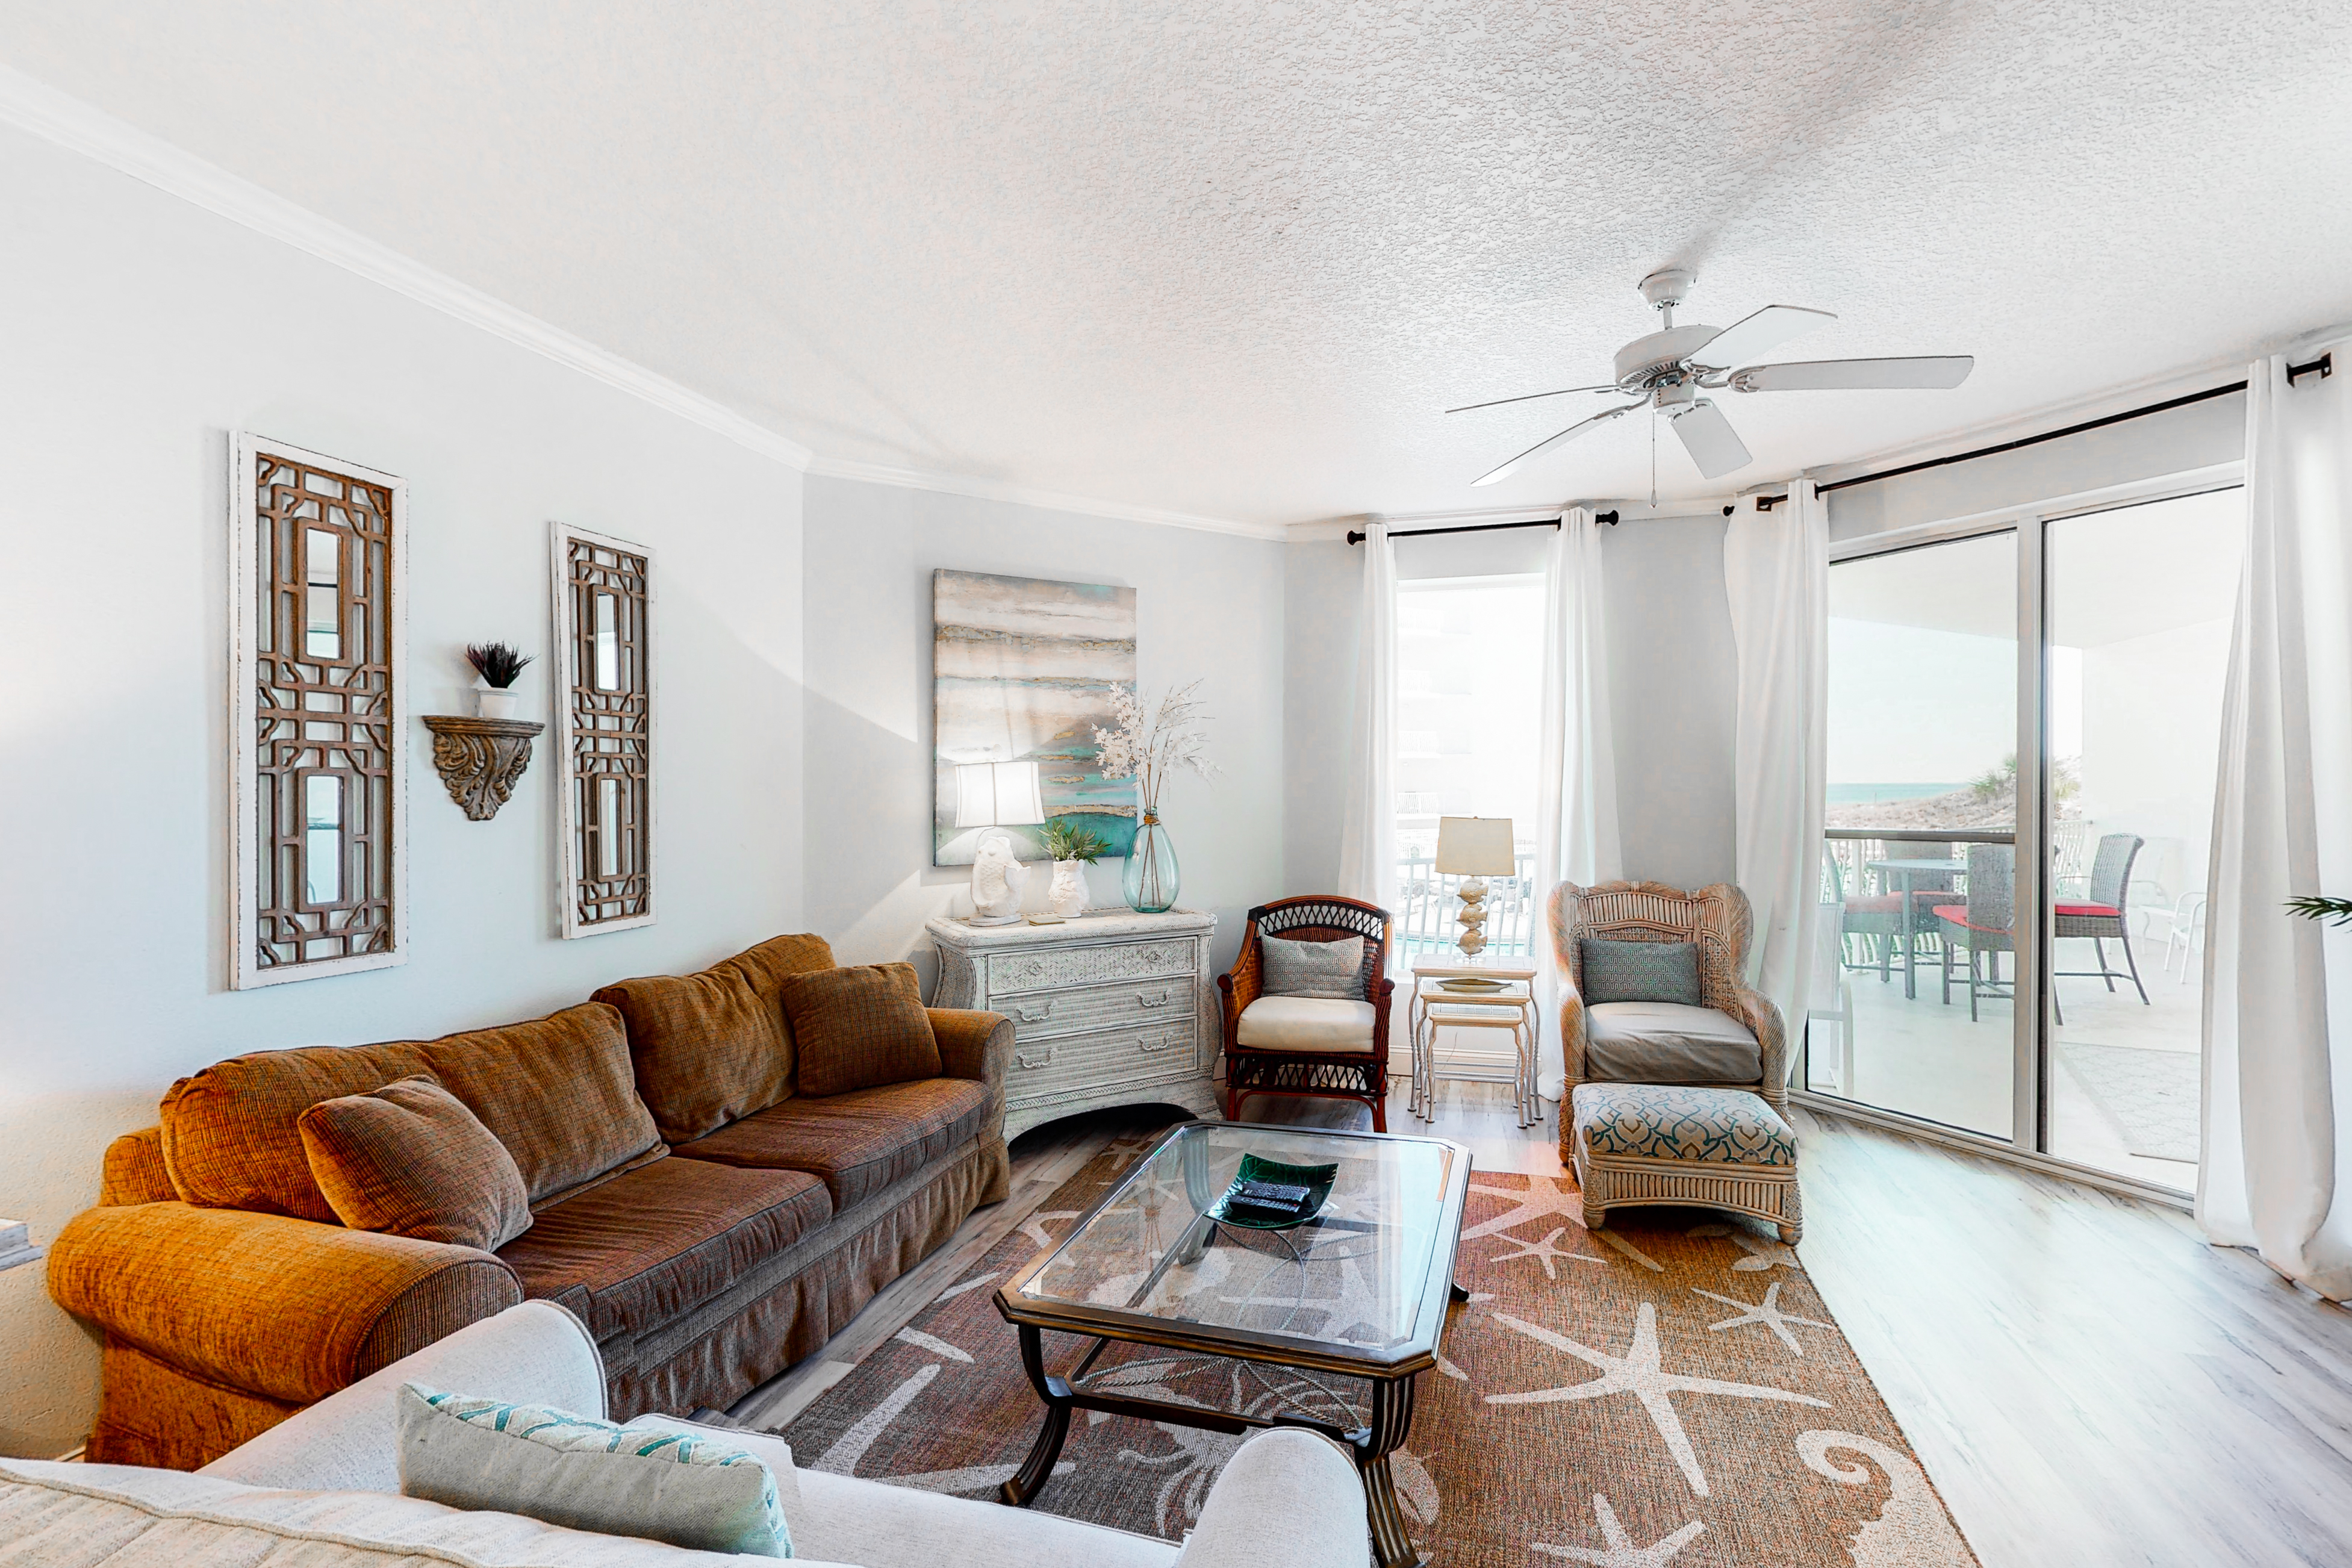 Dunes of Seagrove B101 Condo rental in Dunes of Seagrove in Highway 30-A Florida - #1